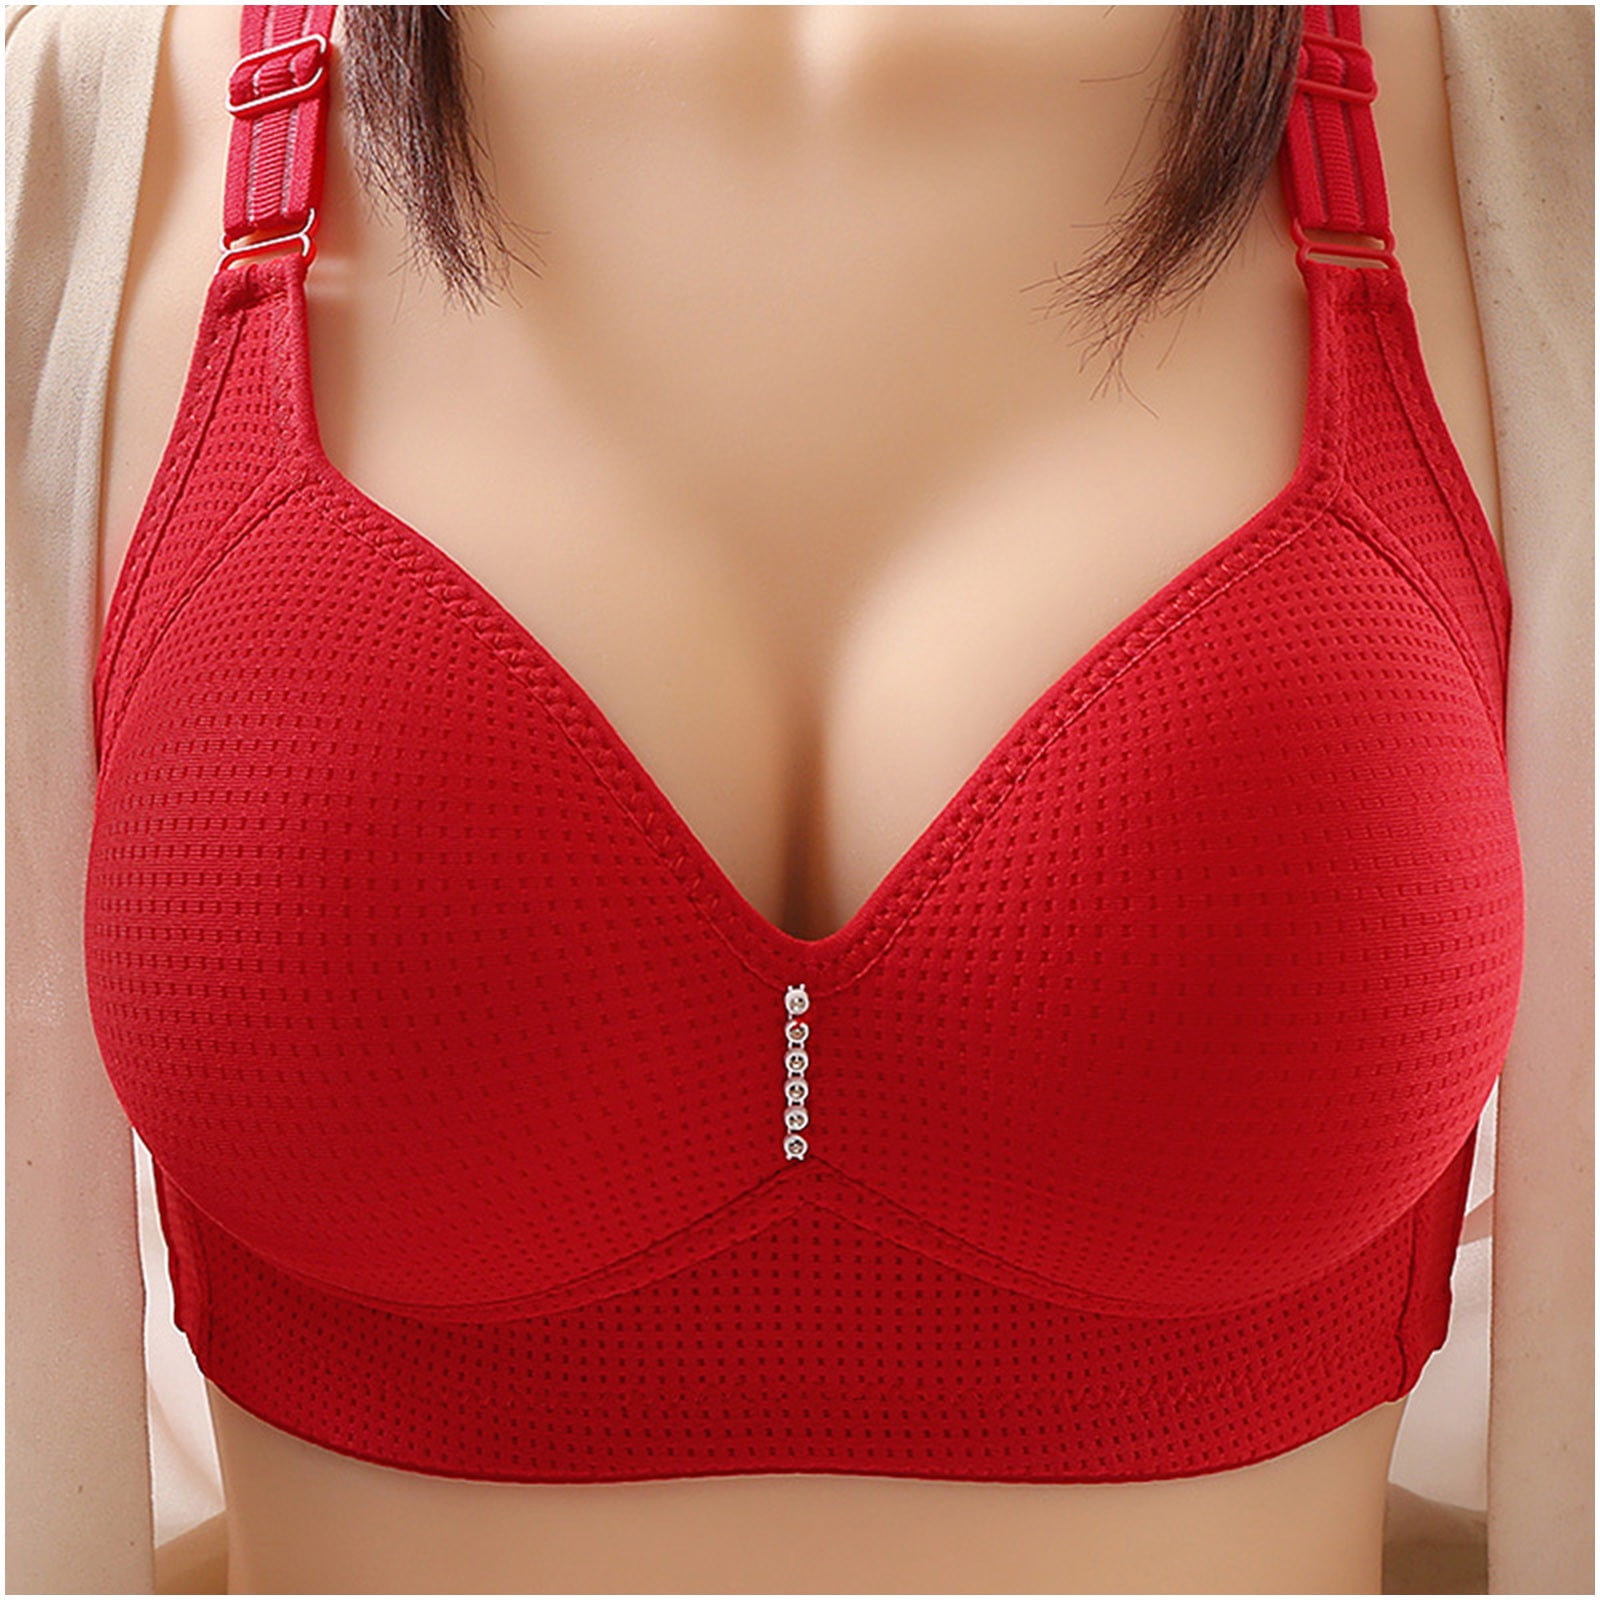 Nude Bra, Woman Sexy Women's Bra Without Steel Rings Sexy Vest Large Size  Lingerie Underwire Nursing Bras, Womens Bras No Underwire Full Support